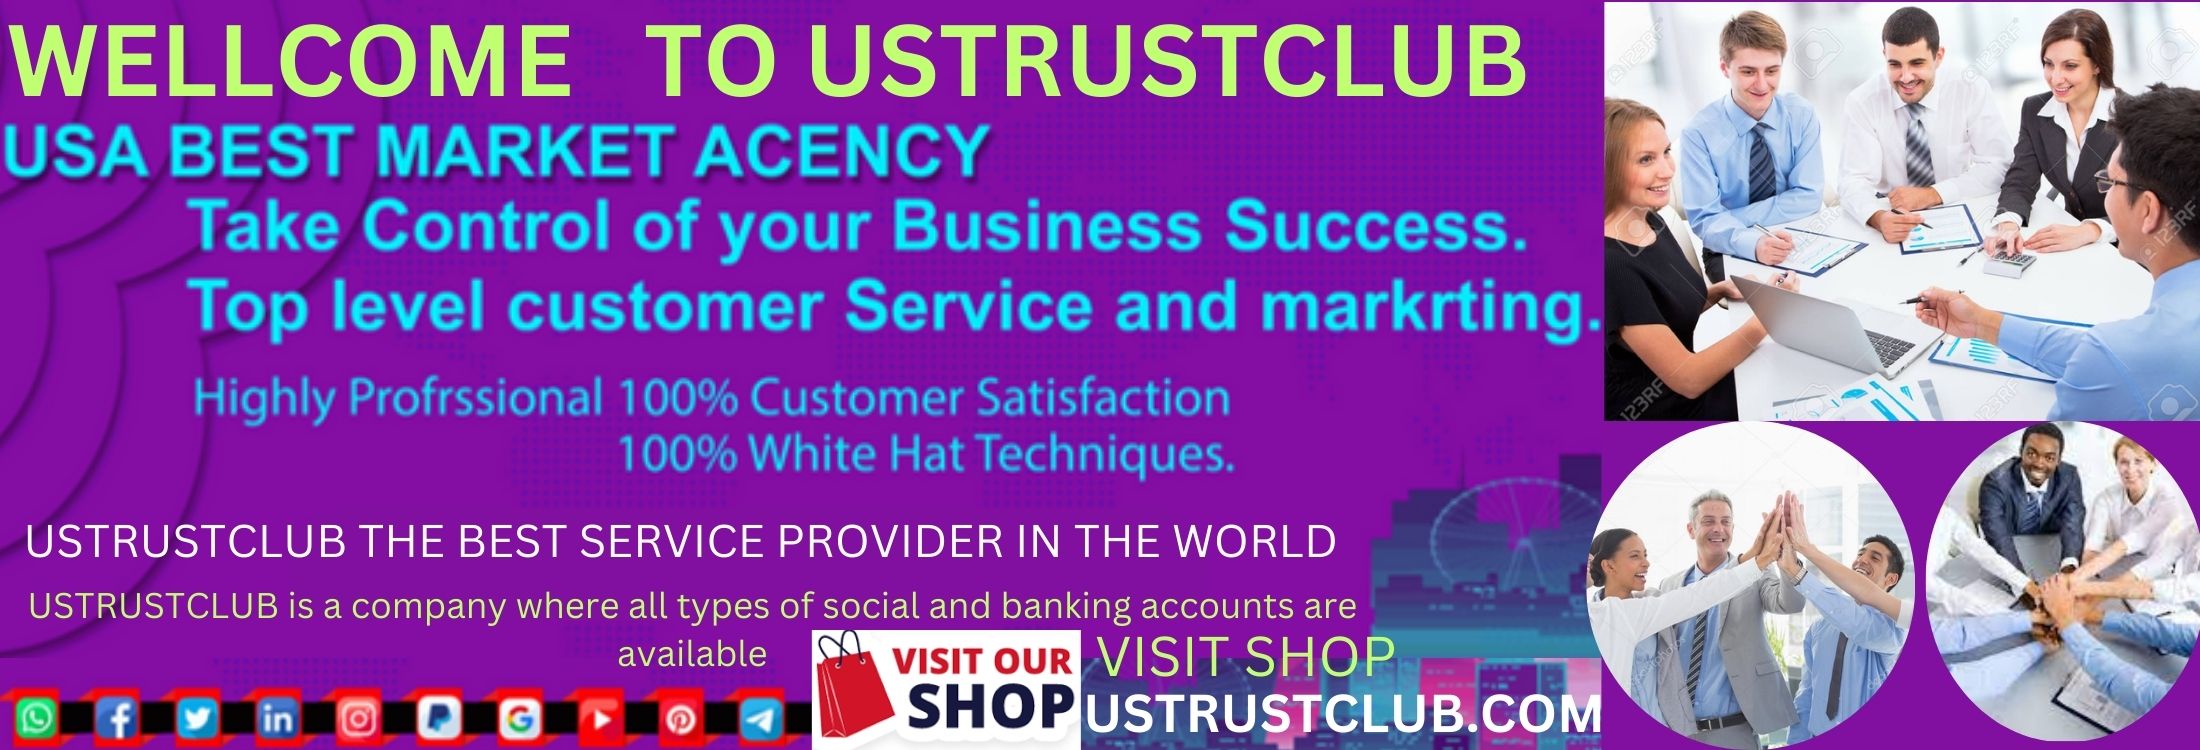 USTRUSTSELL THE BEST SERVICE PROVIDER IN THE WORLD (2)